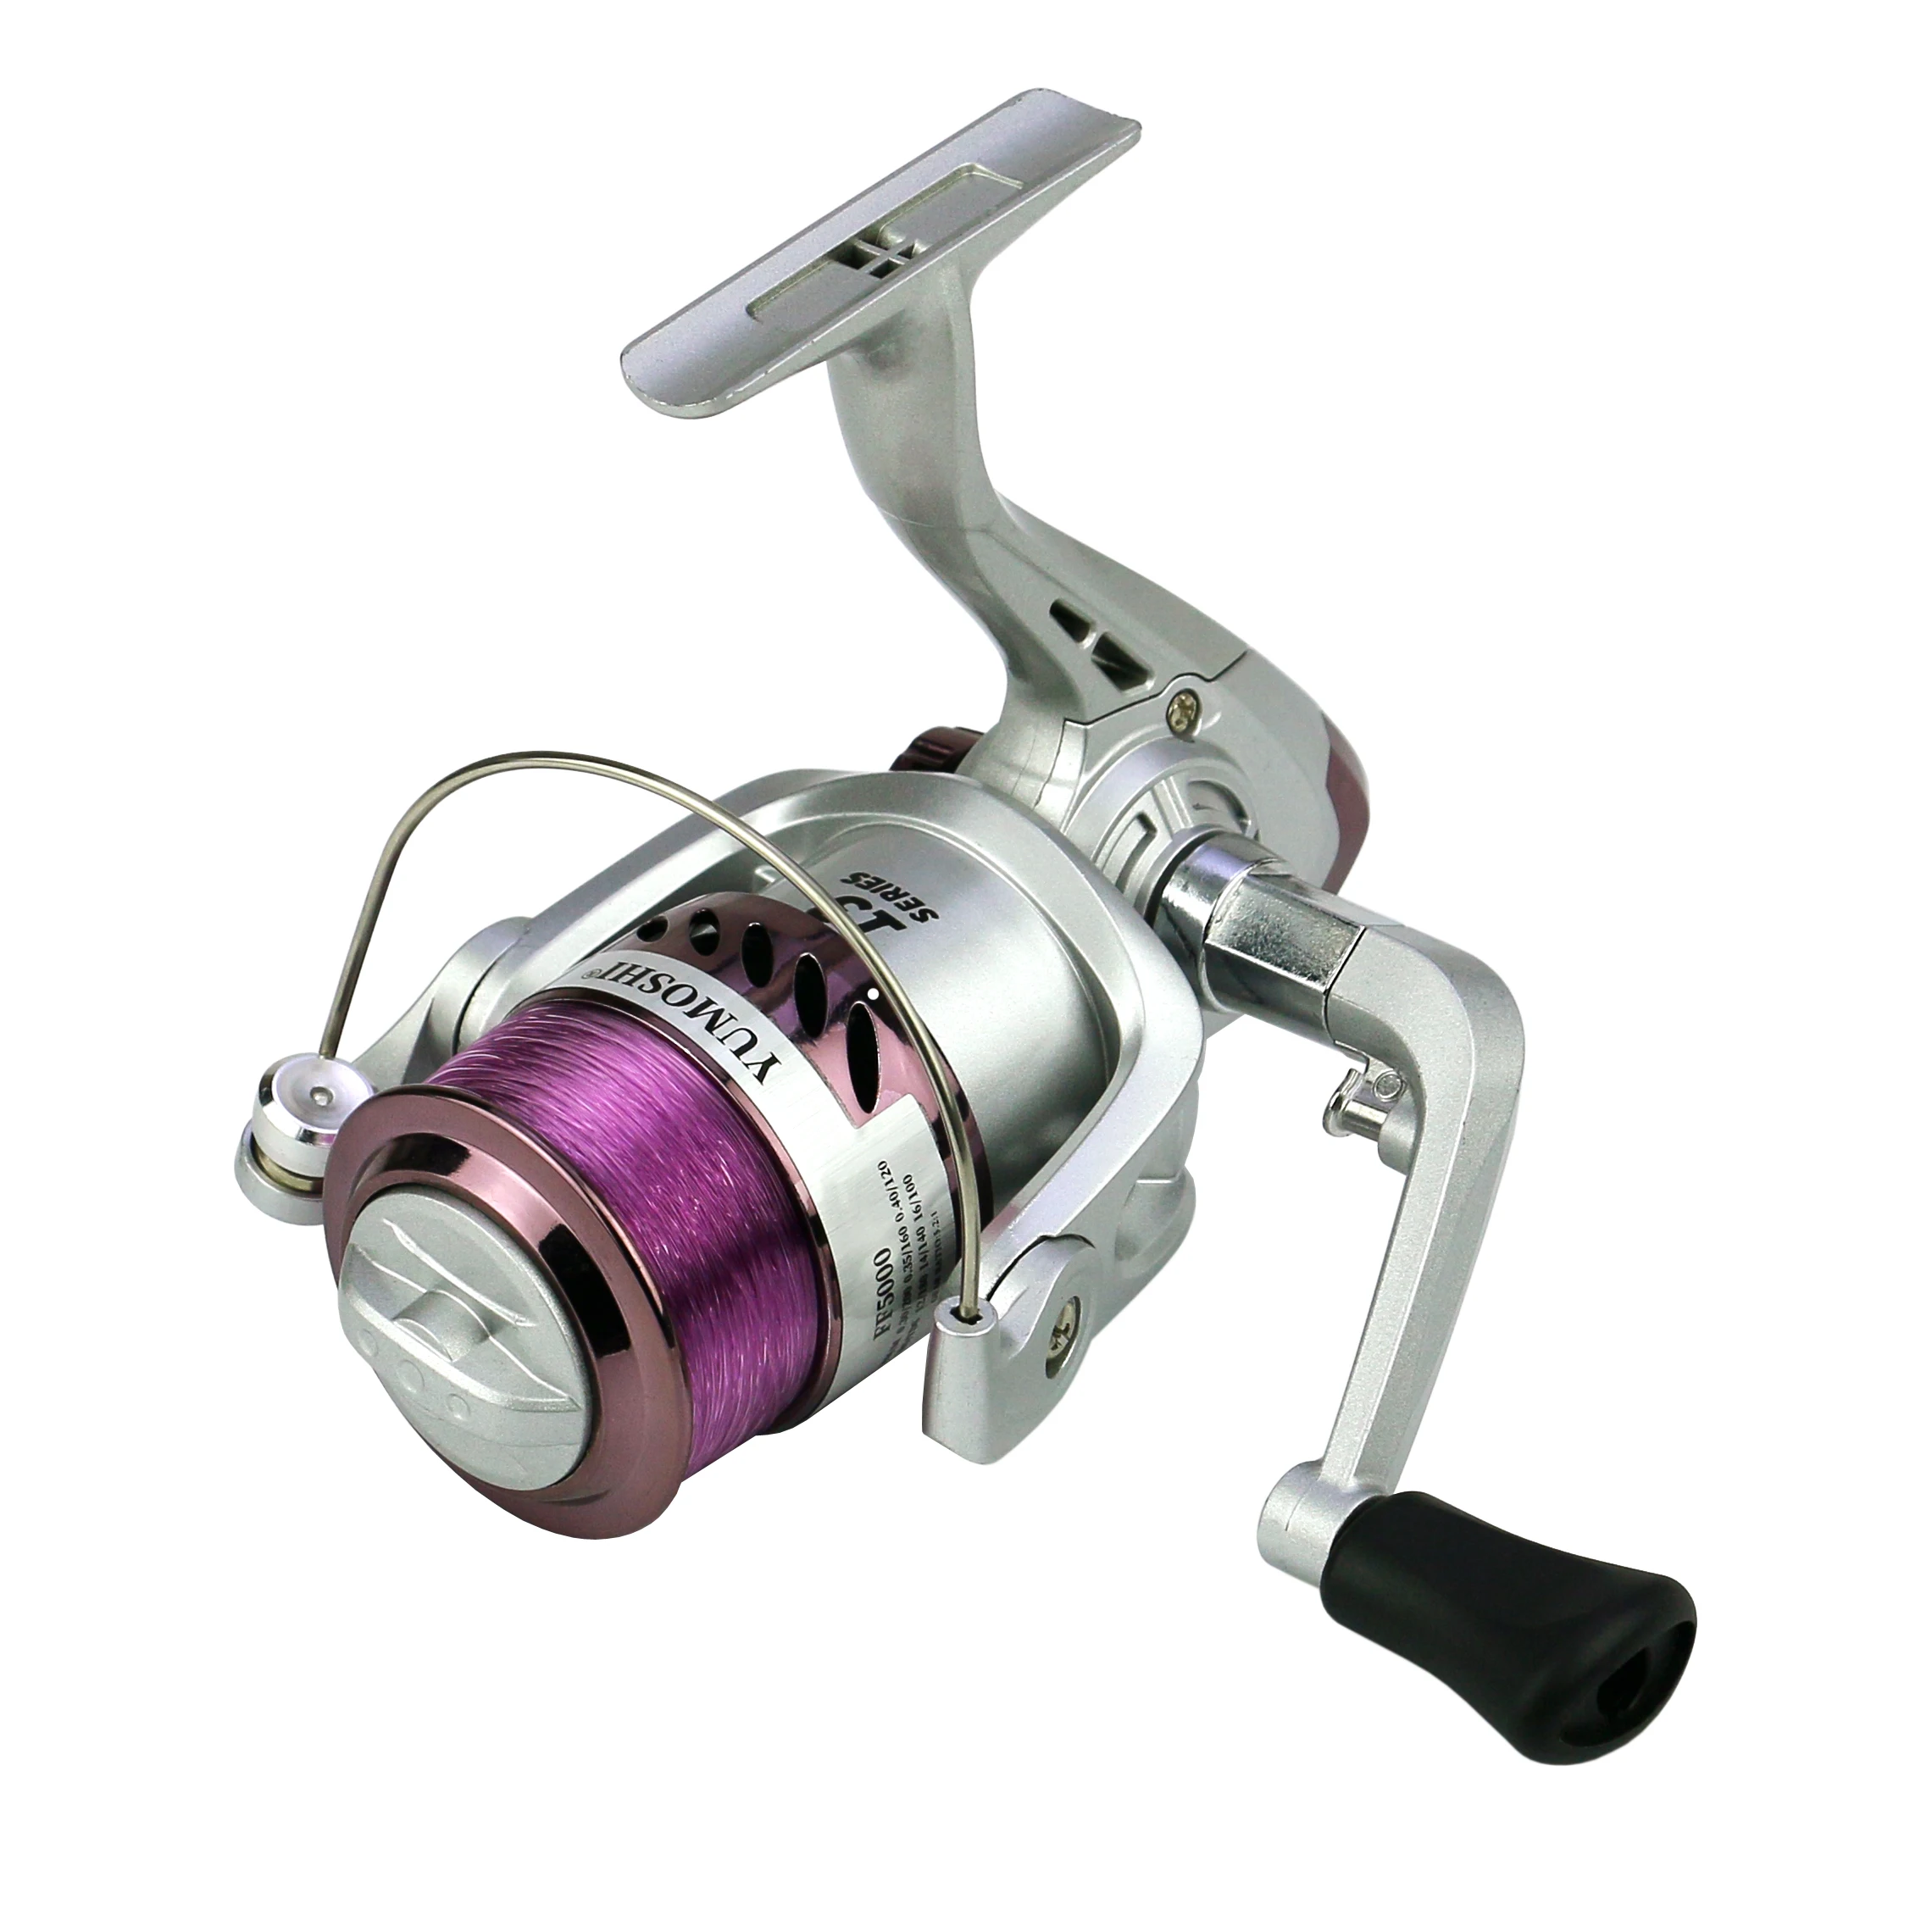 Hot Factory Price 2000-7000 Series 5.2:1 Competitive Spinning Fishing Reel